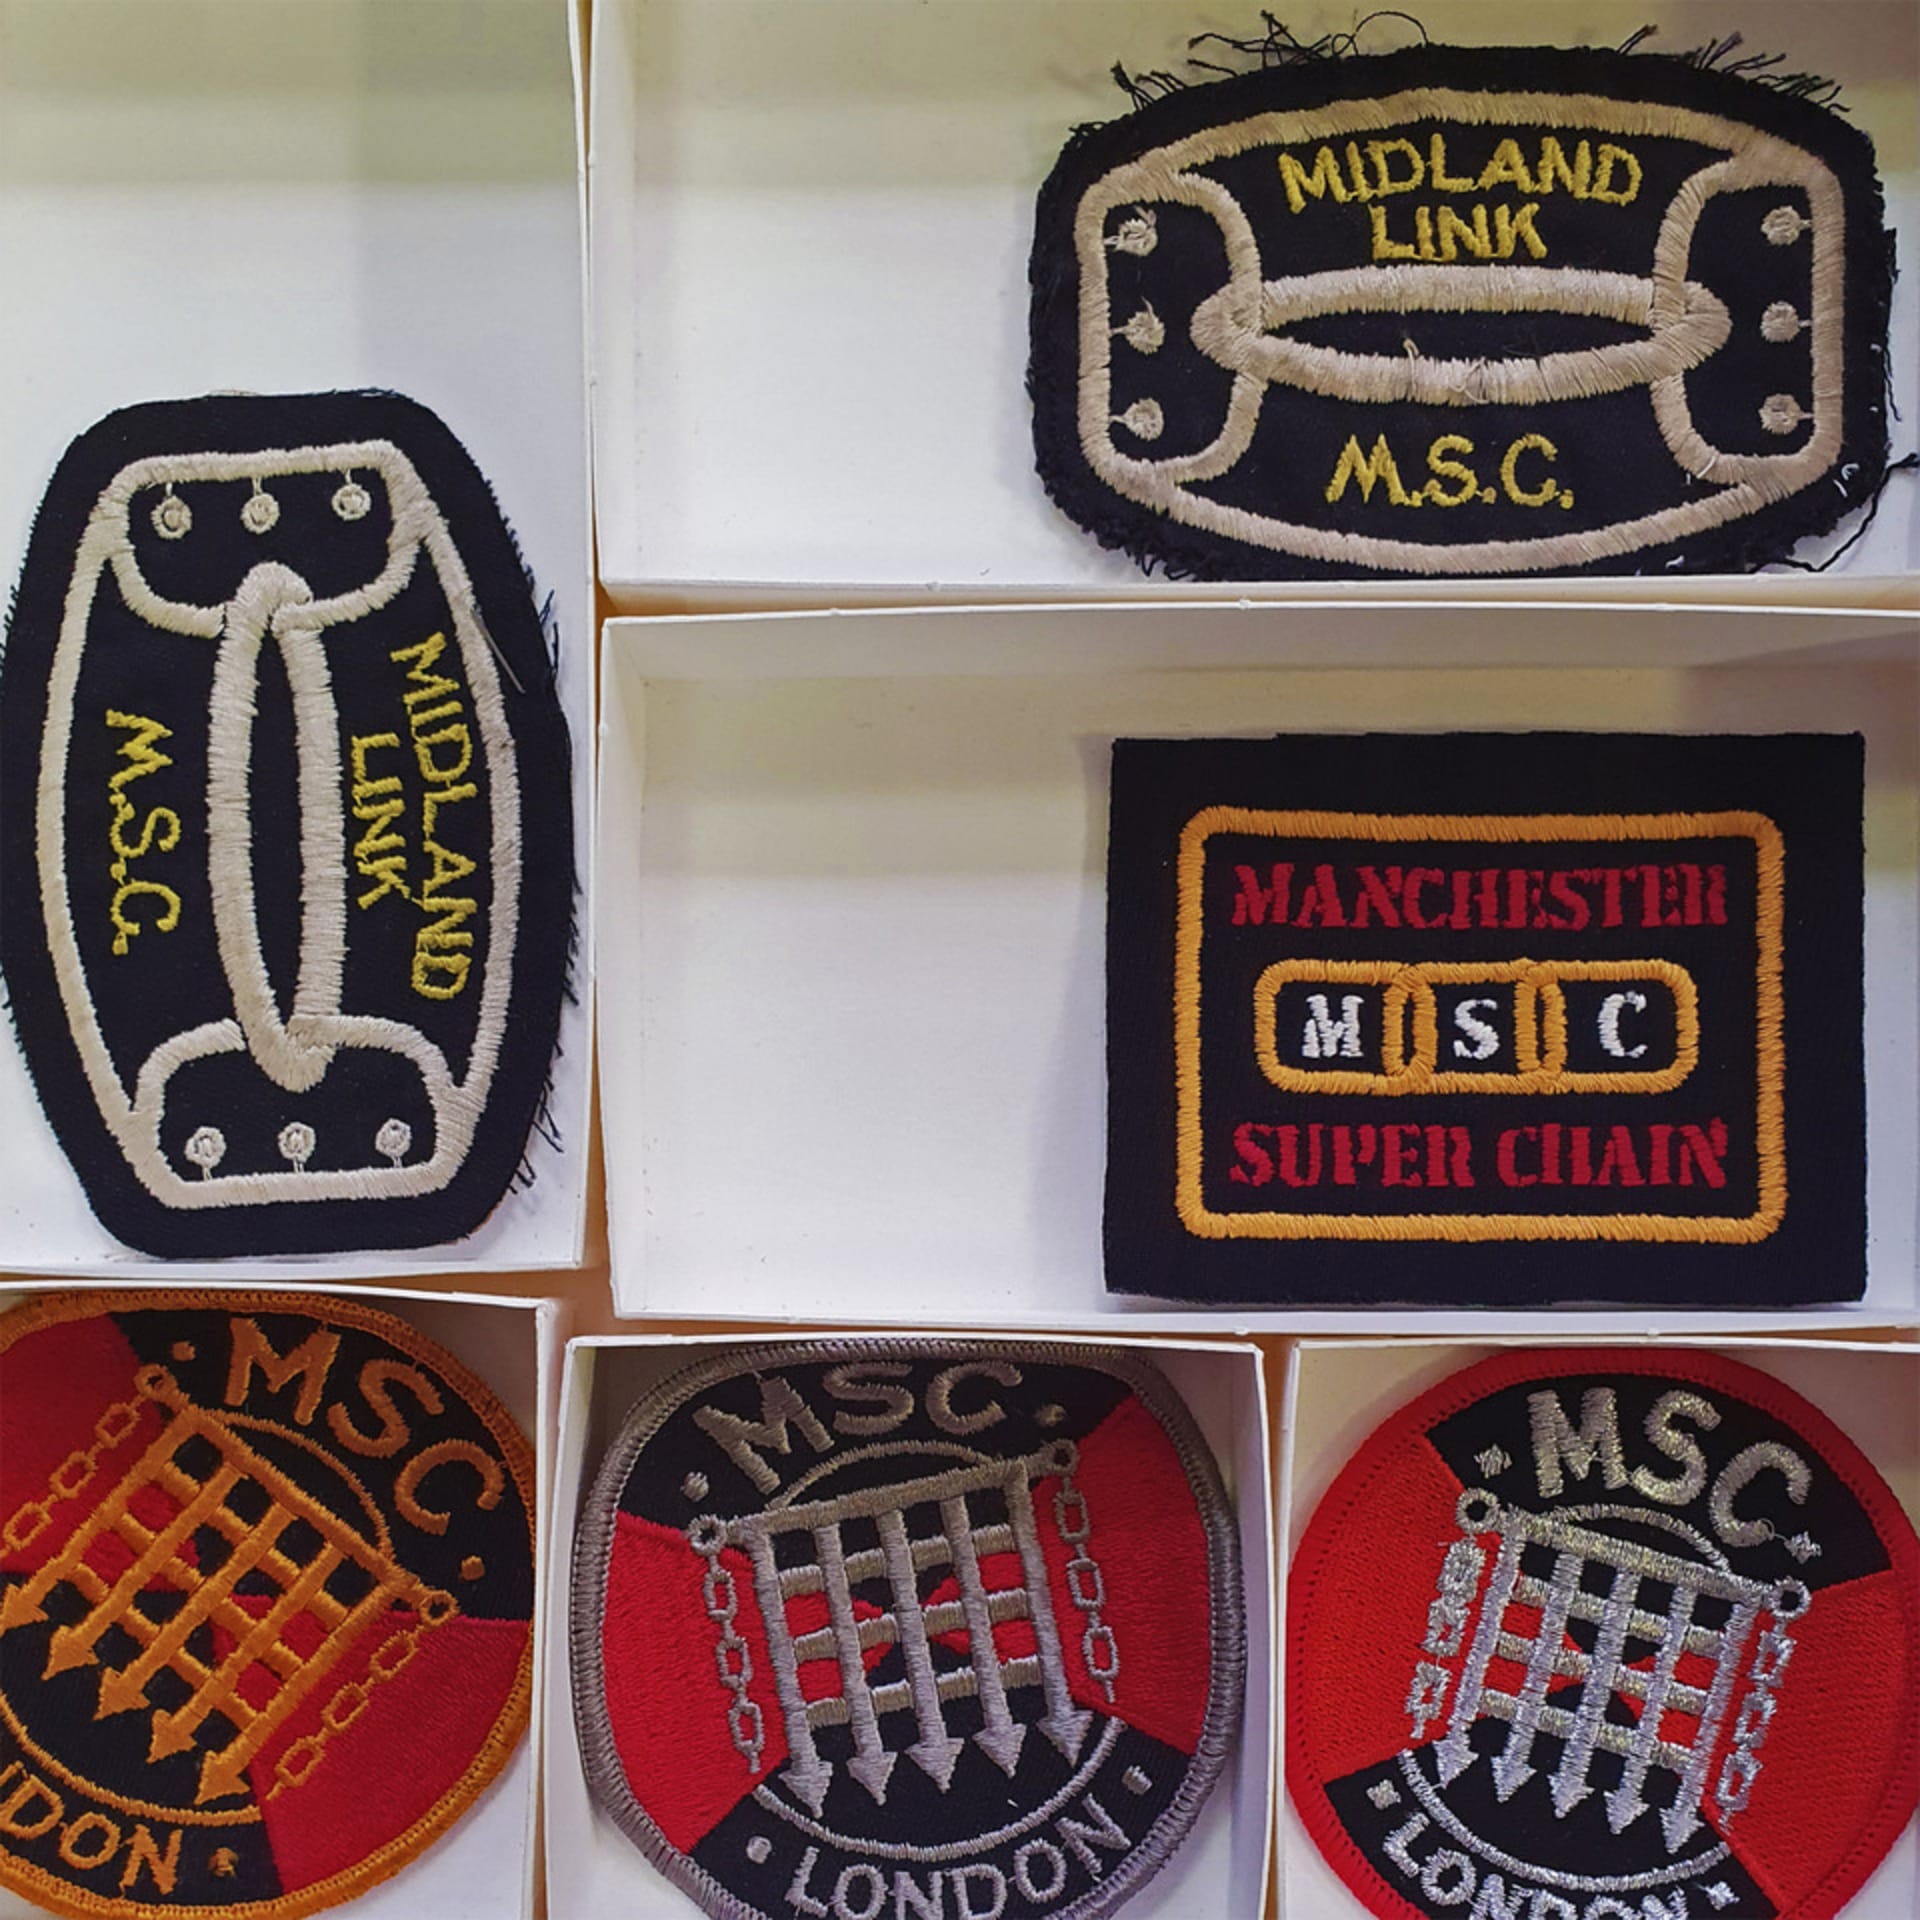 Photograph of patches belonging to multiple leather clubs